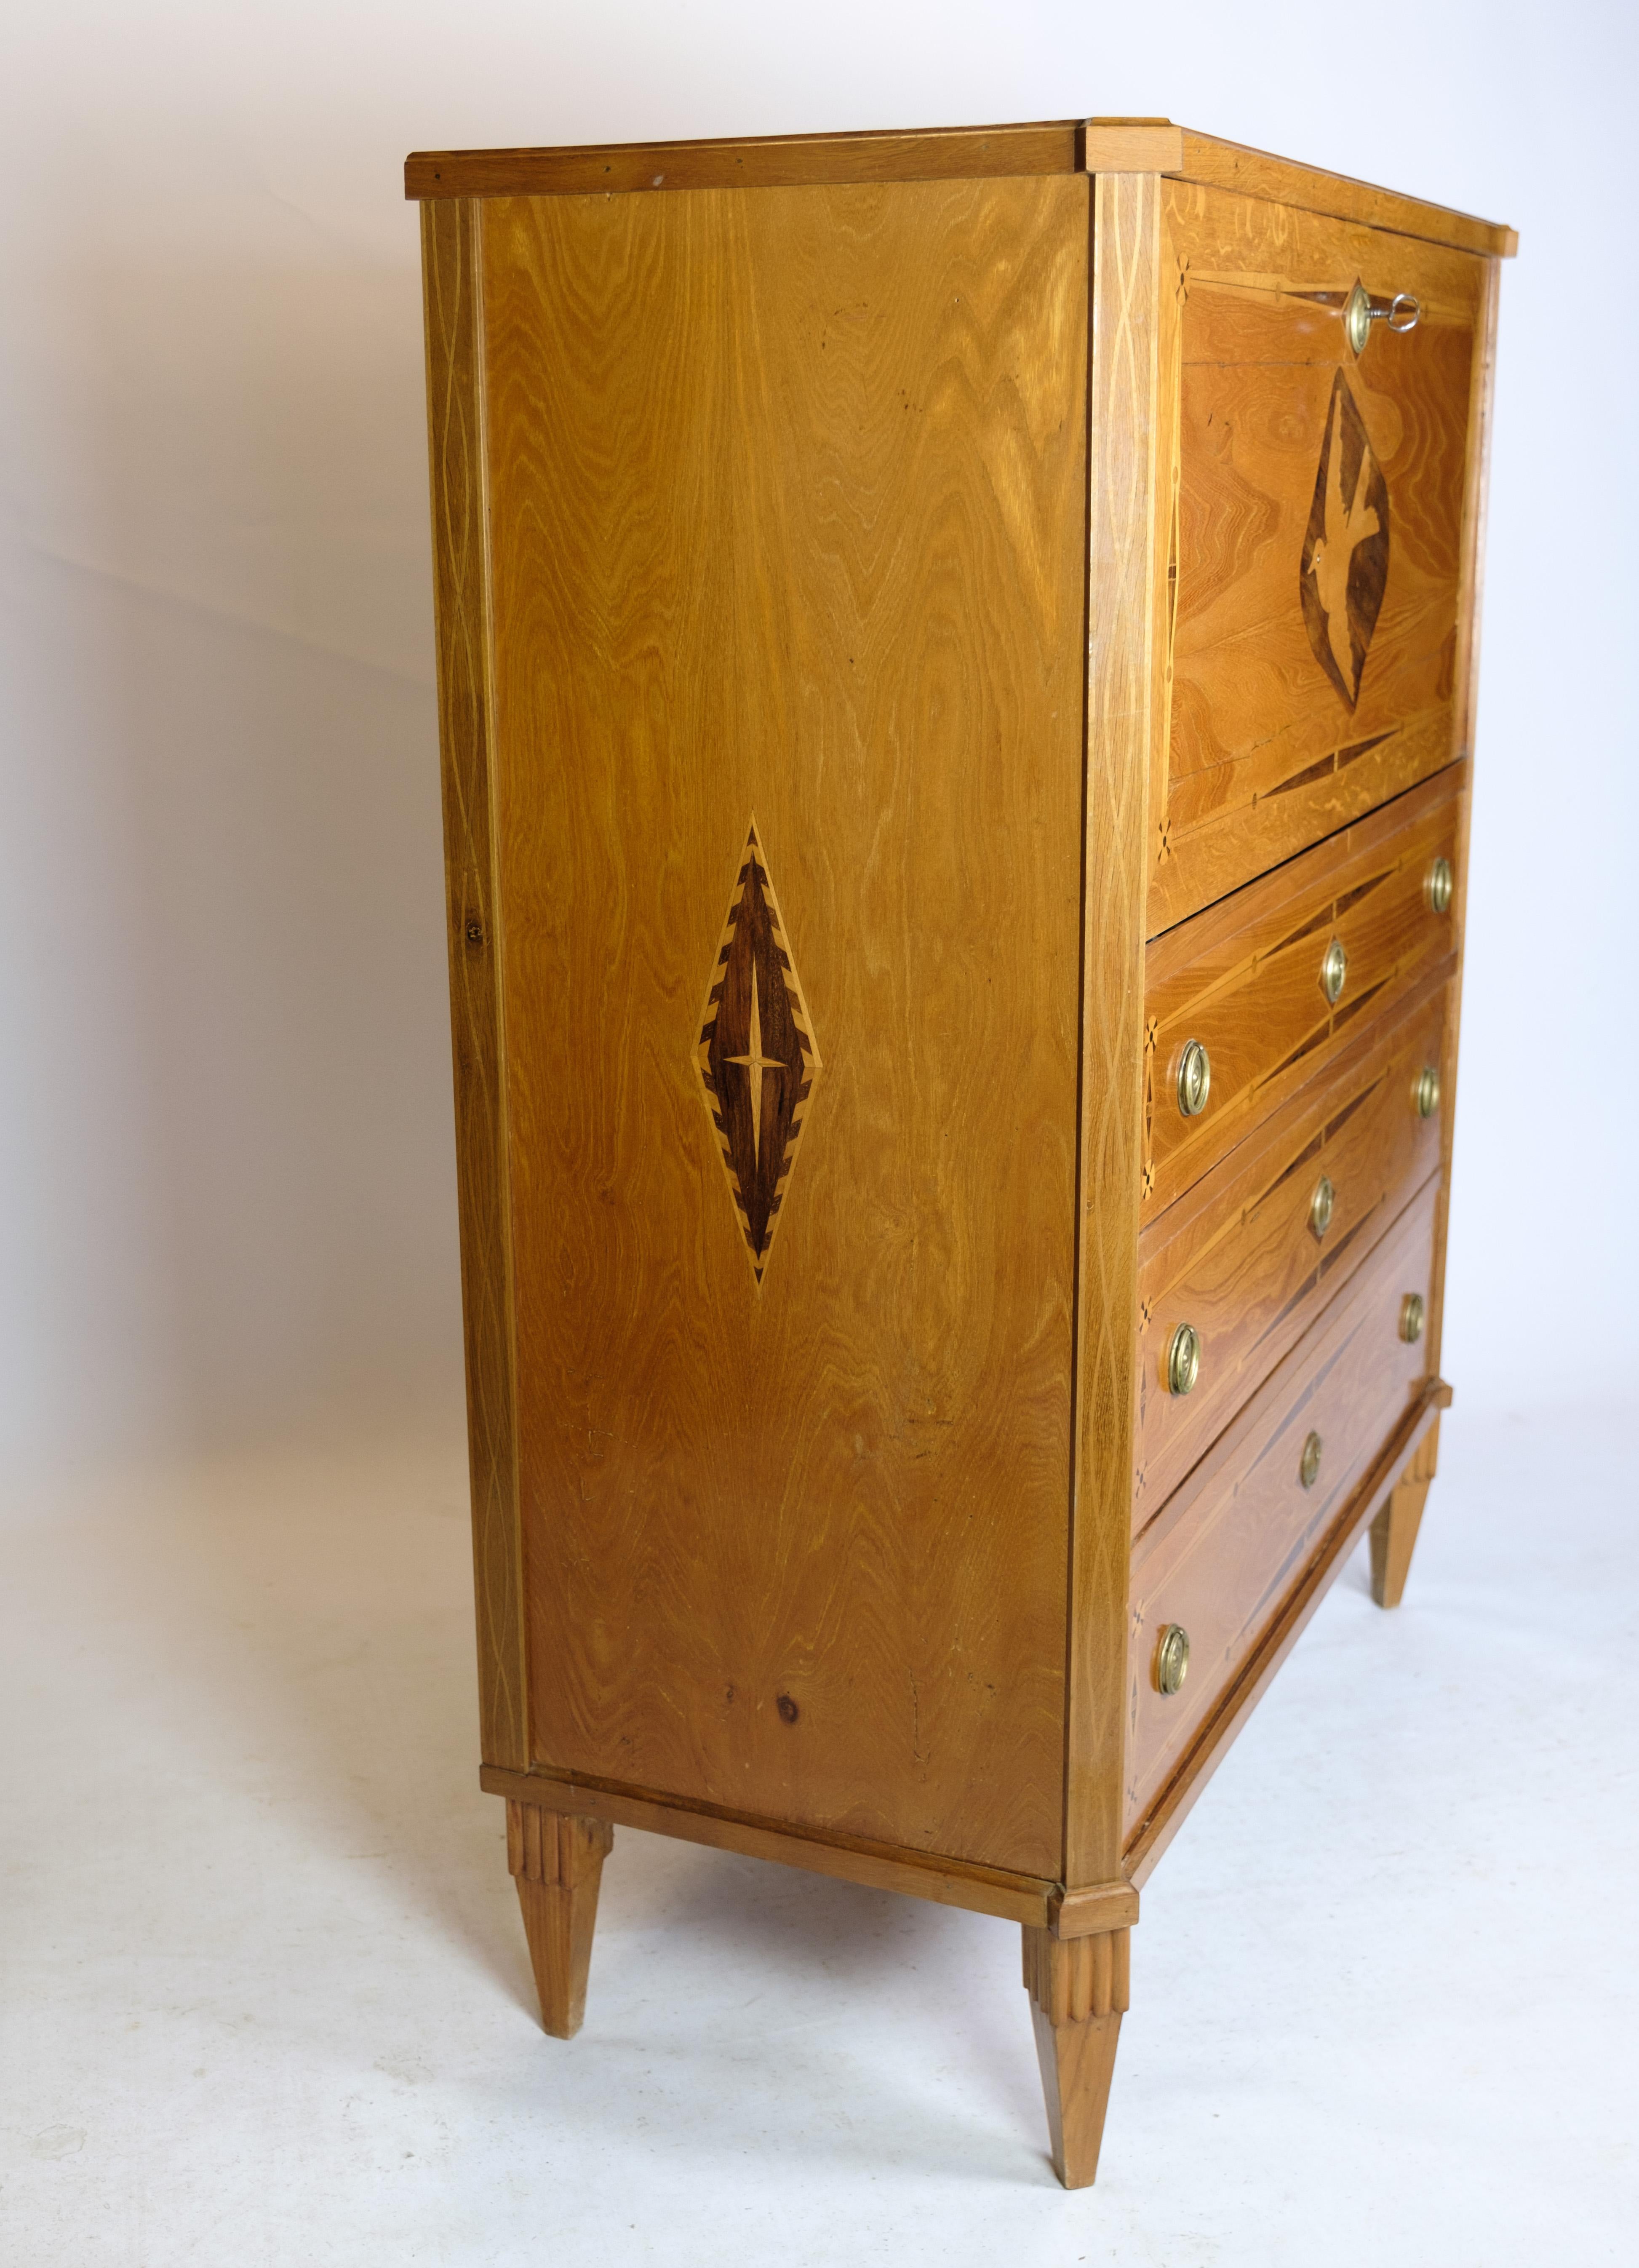 Secretary in Mahogany With Inlaid wood and Brass Handles from the 1790s For Sale 11